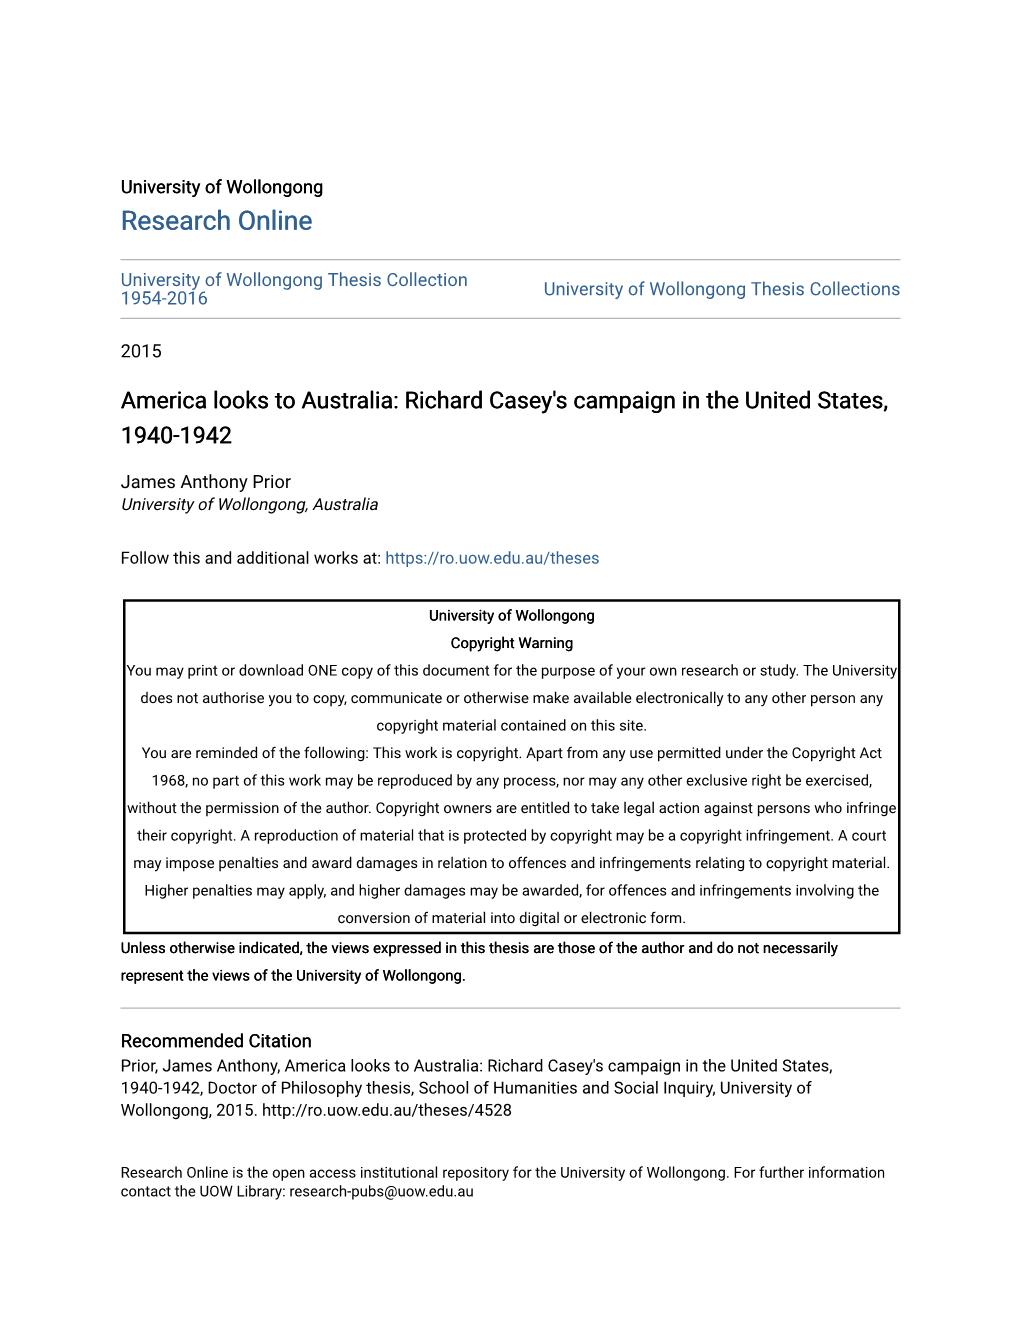 America Looks to Australia: Richard Casey's Campaign in the United States, 1940-1942